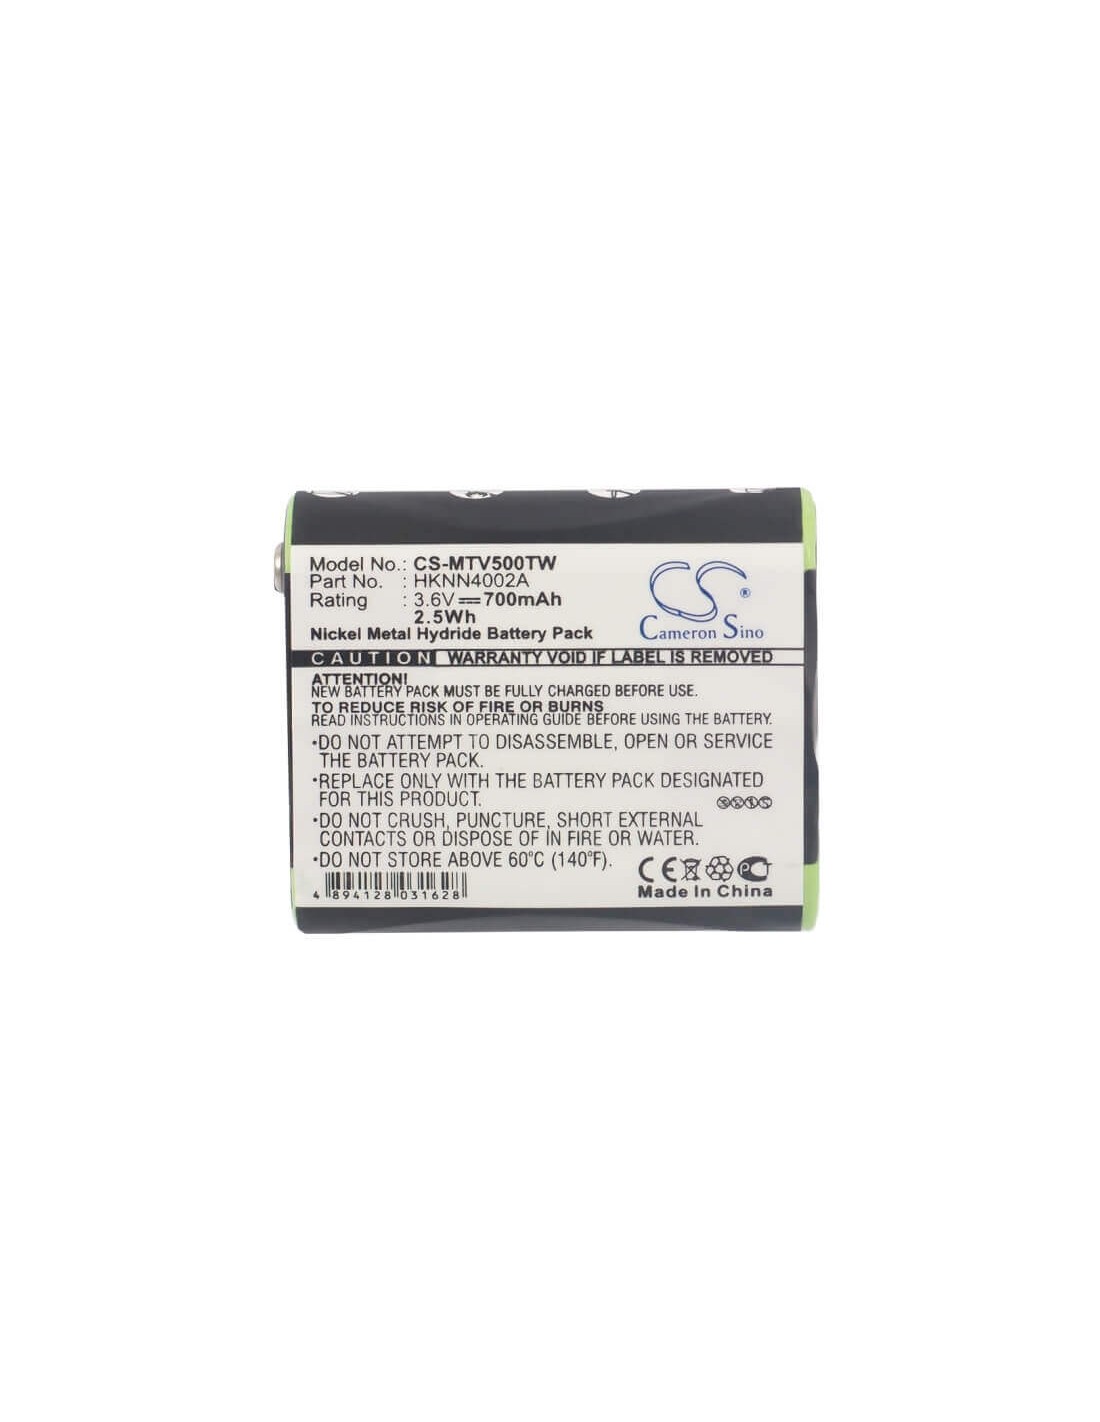 Battery for Motorola Talkabout T4800, Talkabout T4900, Talkabout T5000 3.6V, 700mAh - 2.52Wh